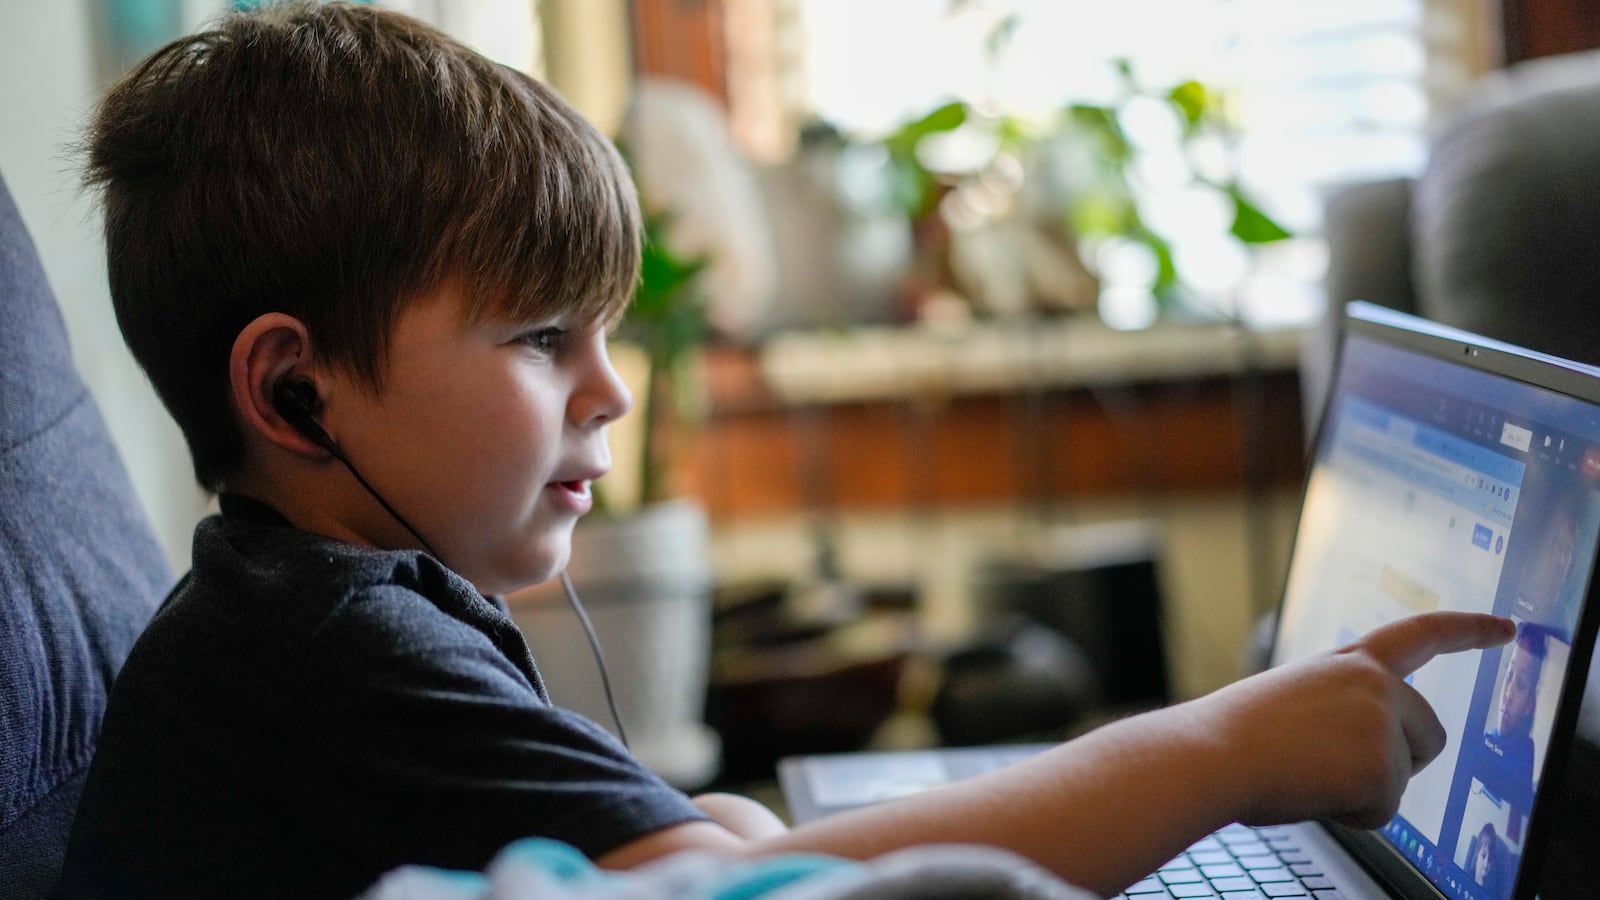 A young boy works on his laptop while sitting on a couch, pointing at the screen while wearing headphones.